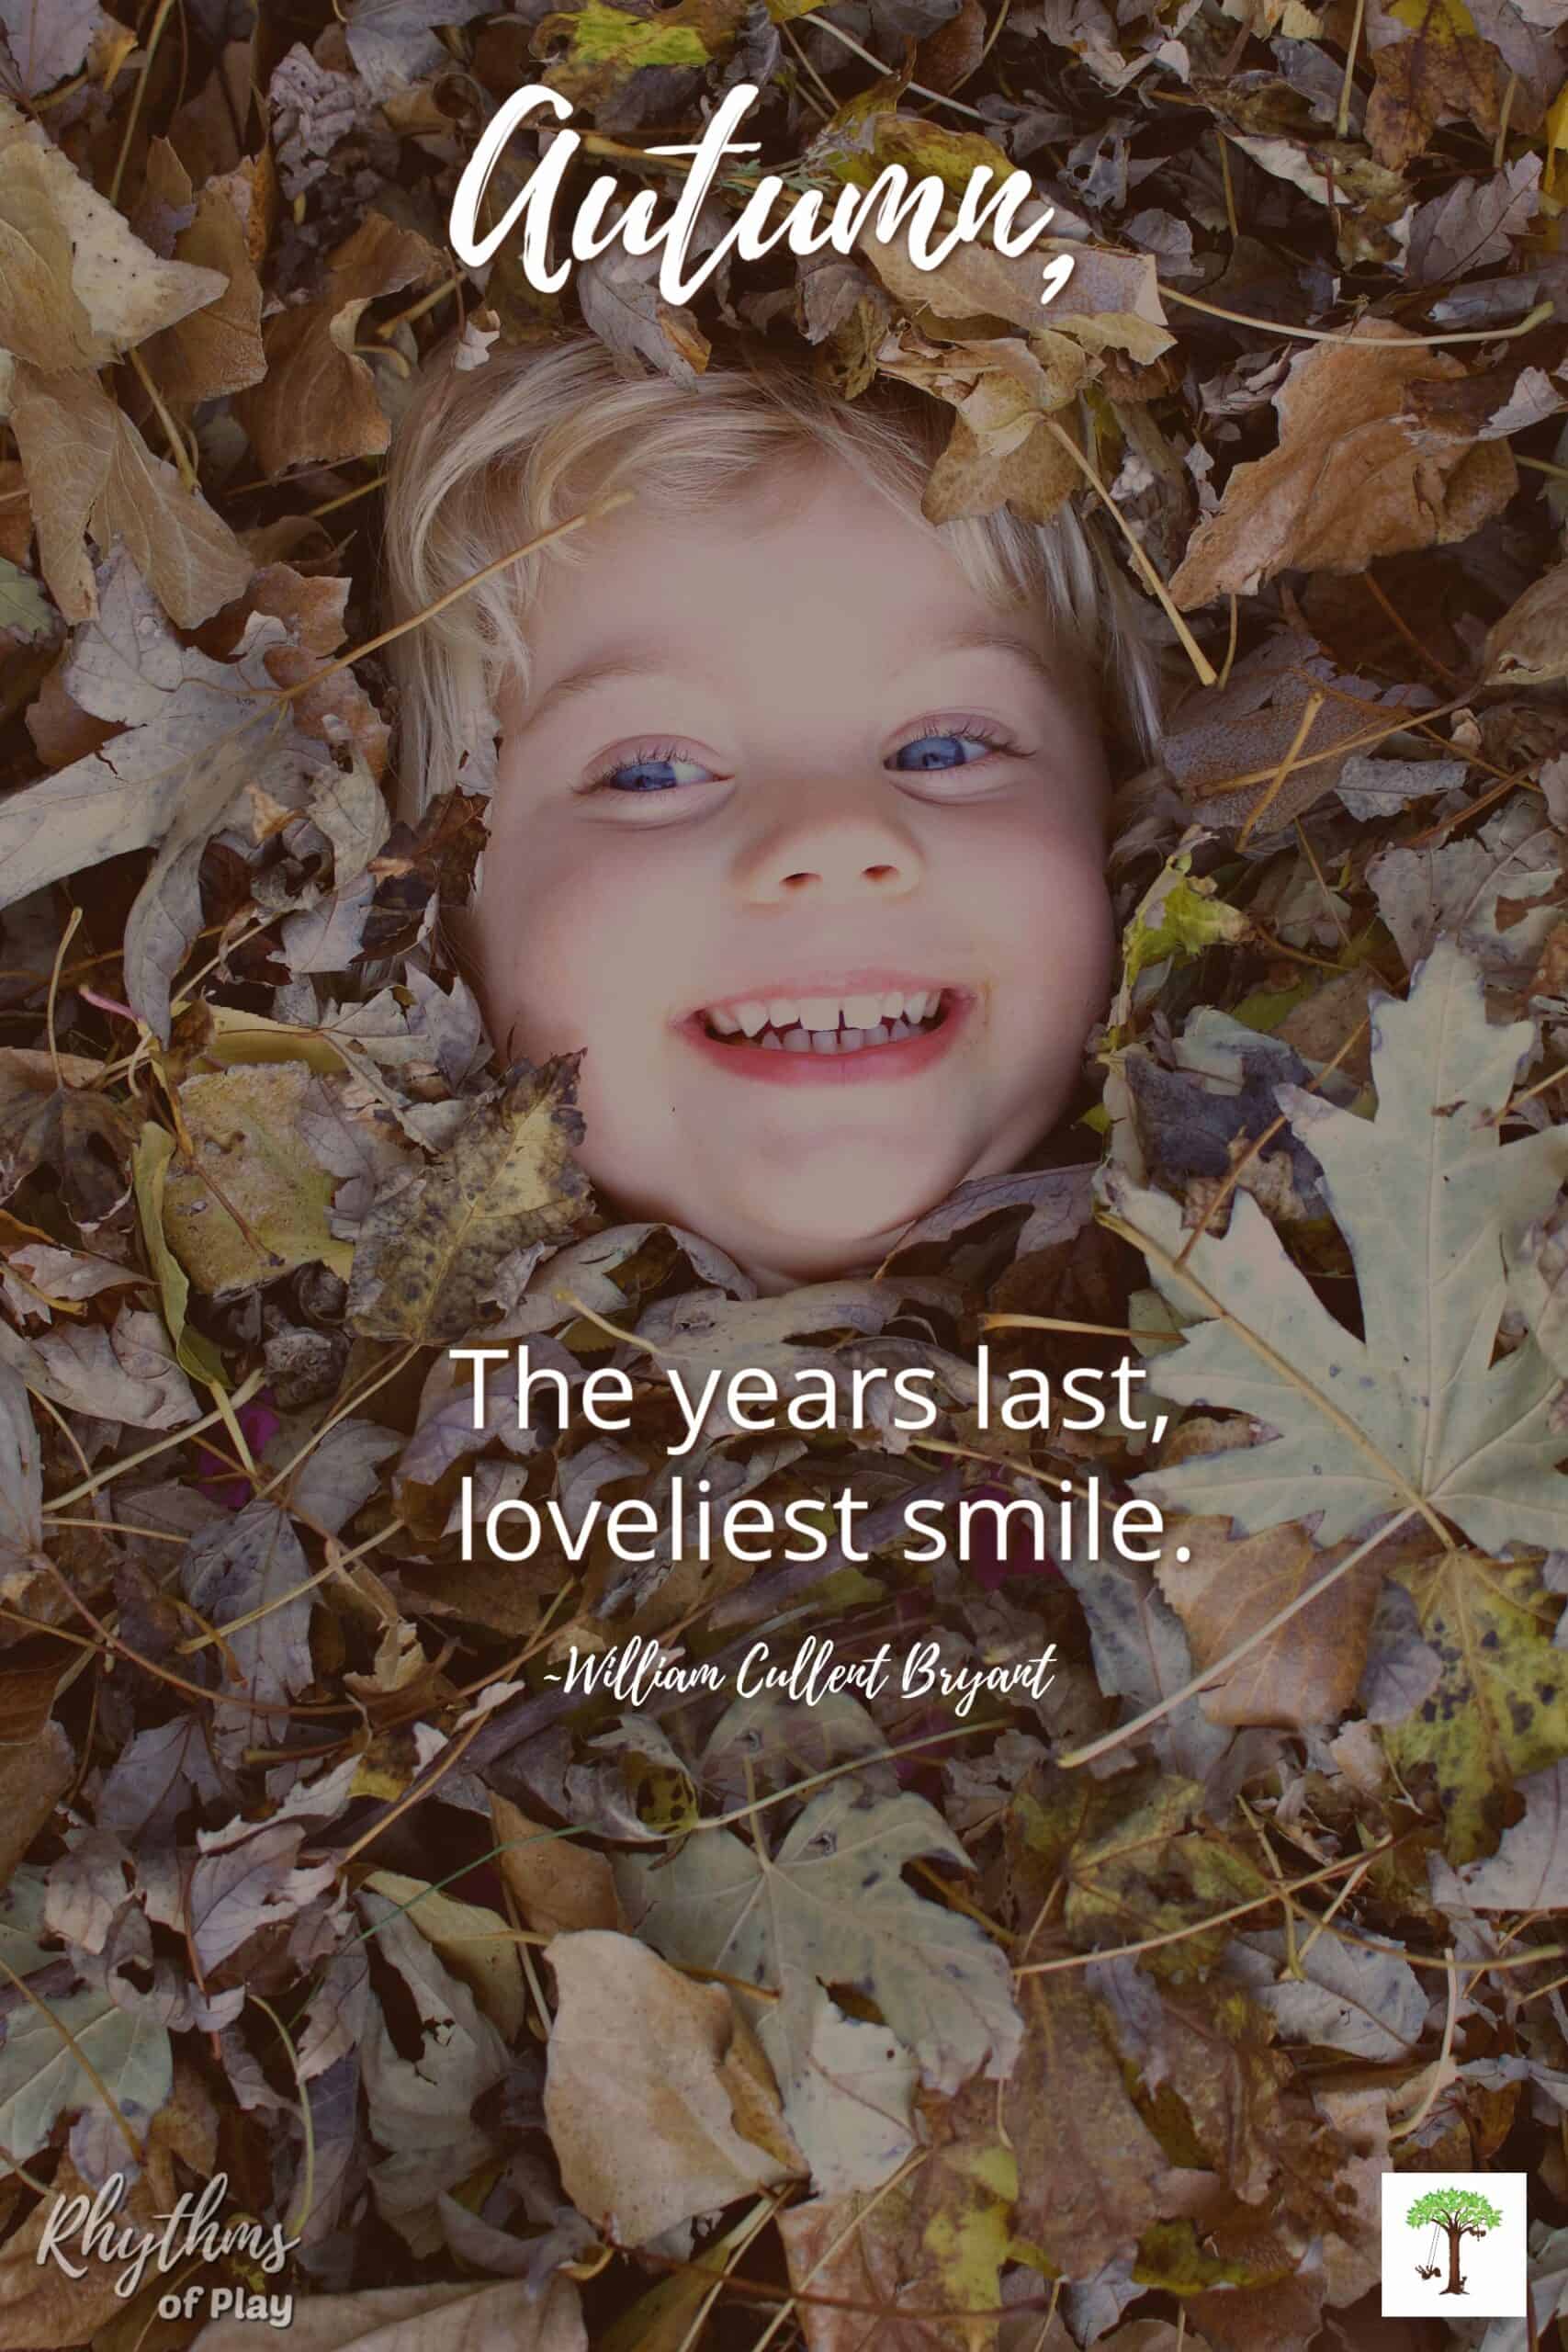 Childs smiling face showing in a pile of leaves with quote, "Autumn, the years last, loveliest smile."